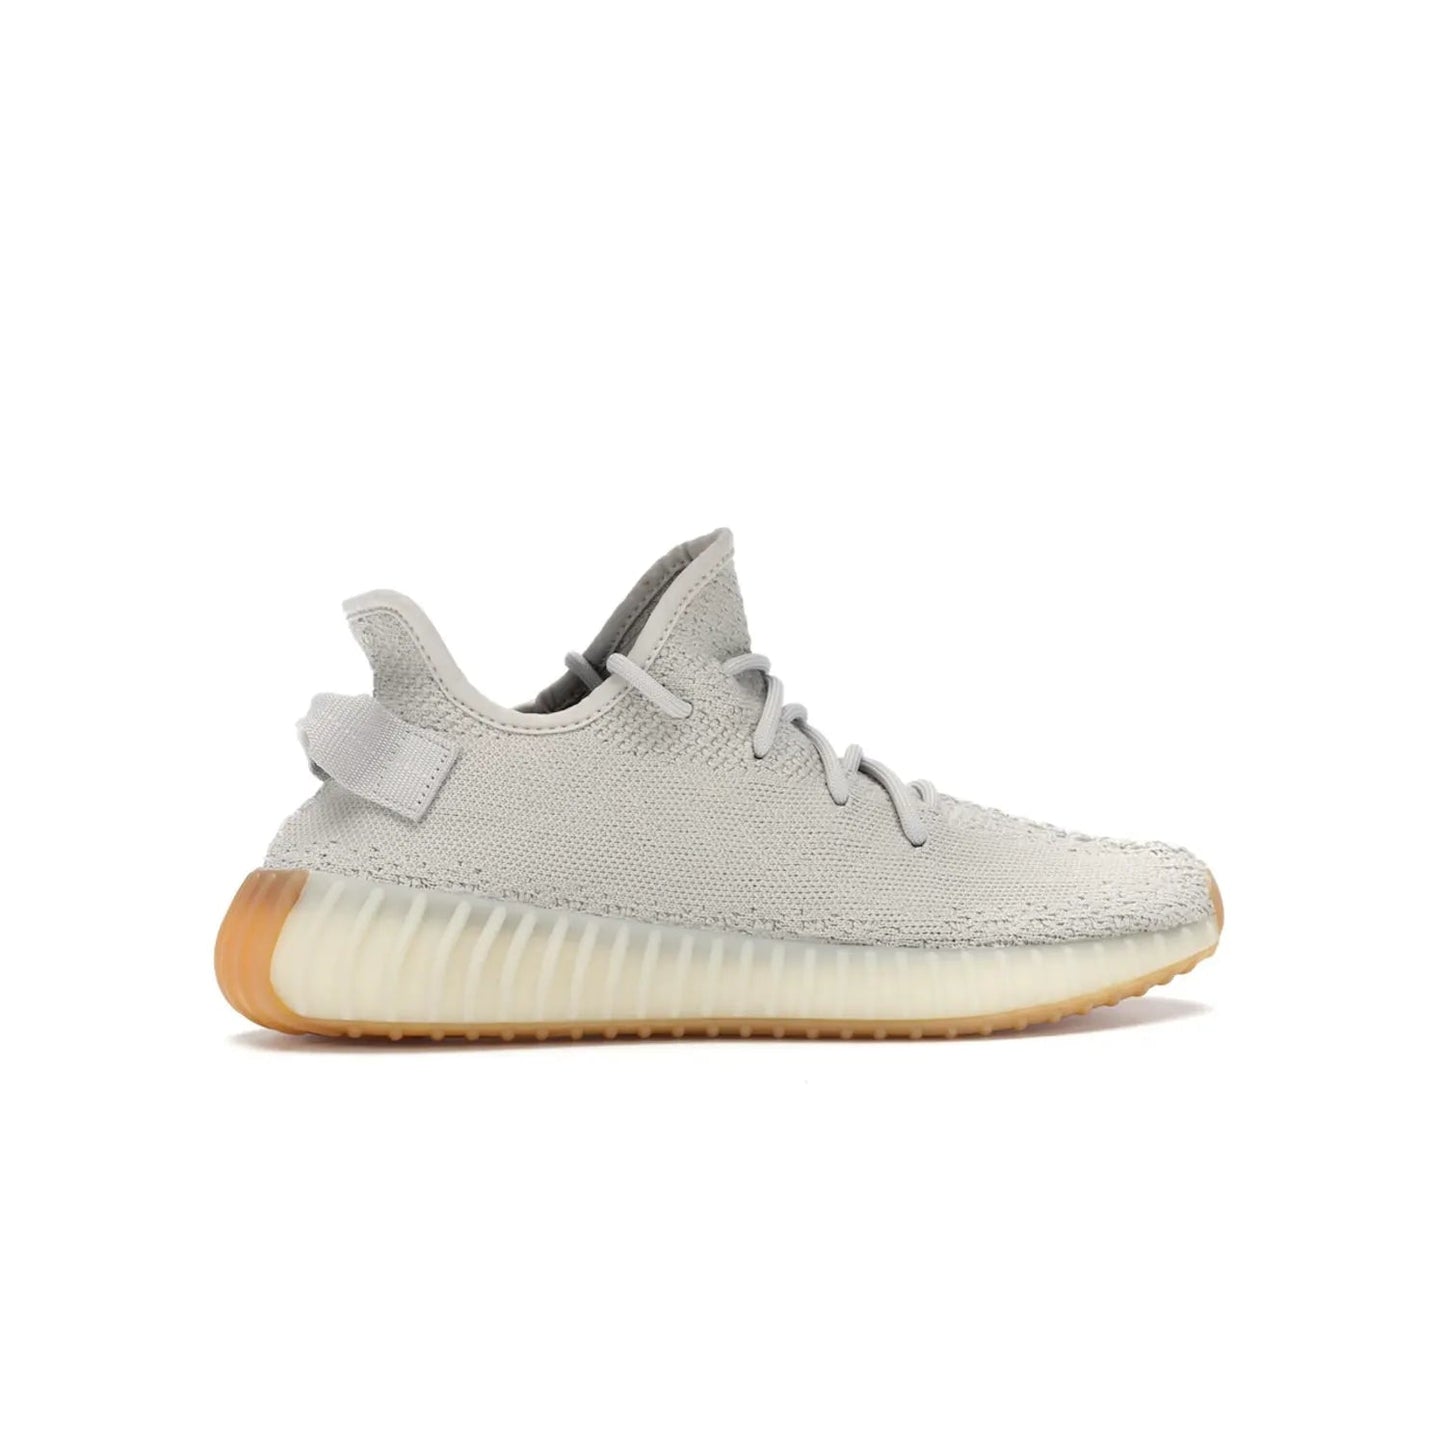 adidas Yeezy Boost 350 V2 Sesame - Image 36 - Only at www.BallersClubKickz.com - Introducing the adidas Yeezy Boost 350 V2 Sesame. Featuring a sesame upper, midsole and gum sole for a sleek silhouette. Cop the stylish sneaker released in November 2018.